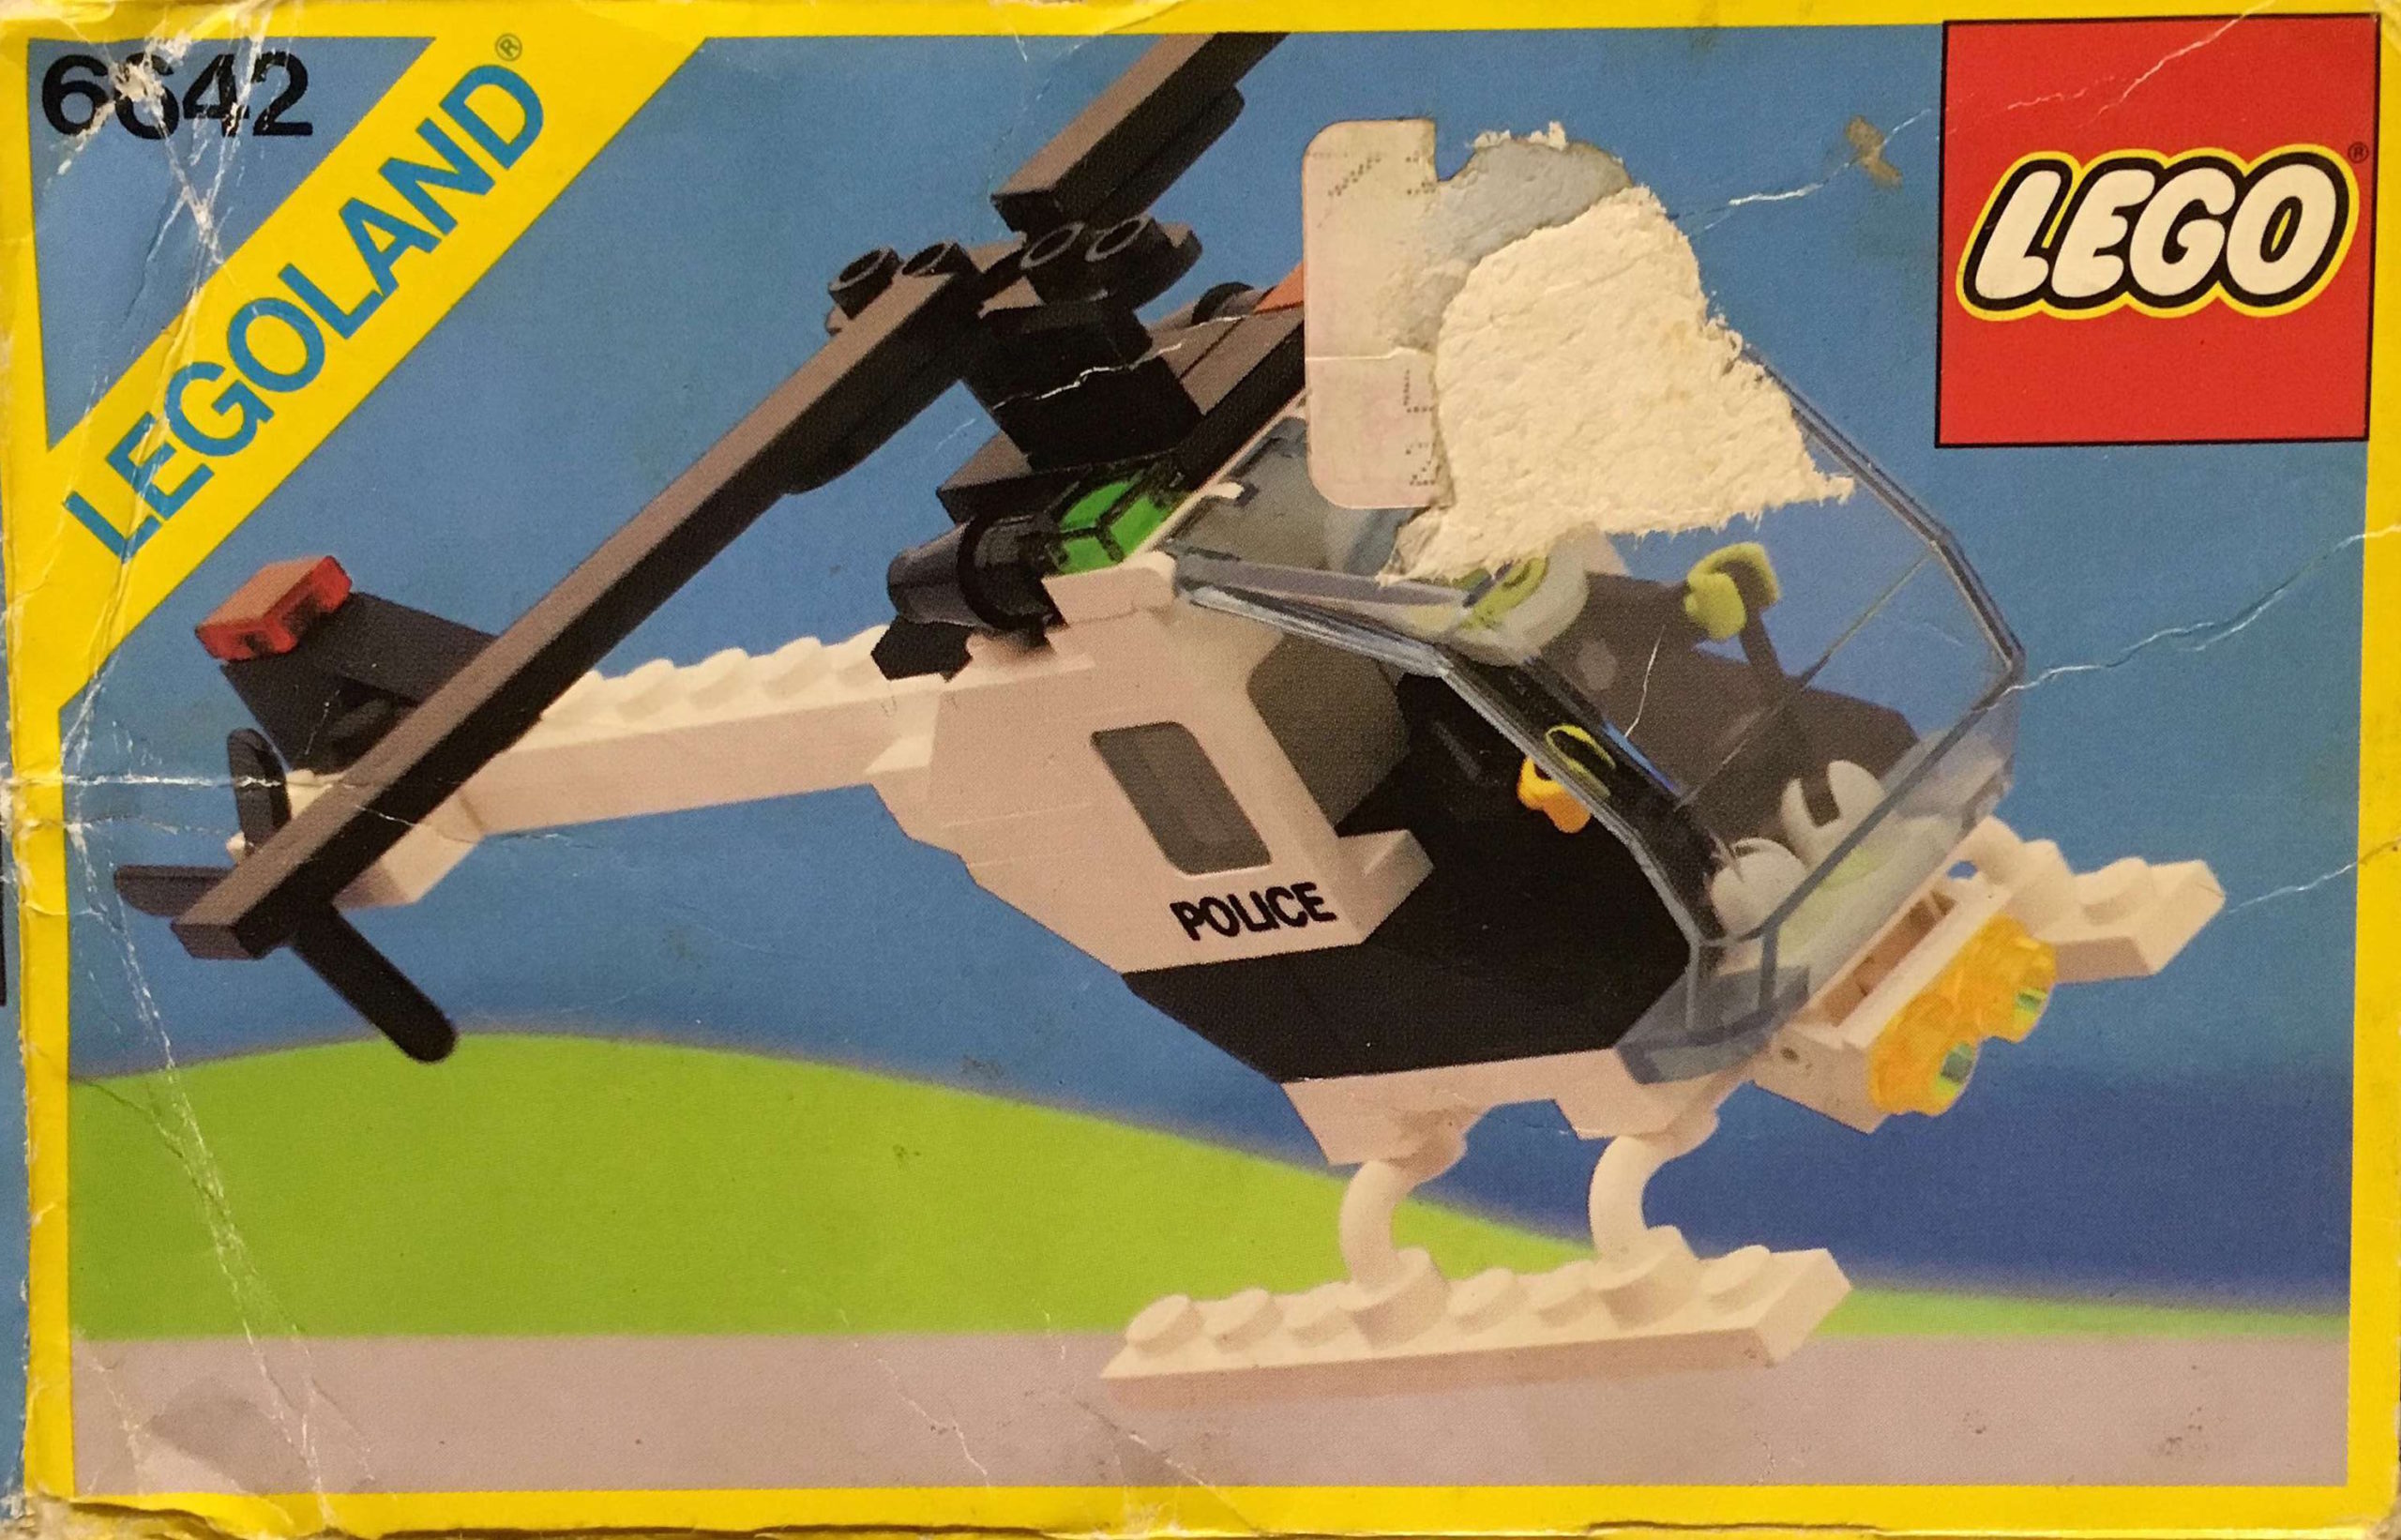 6642: Police Helicopter